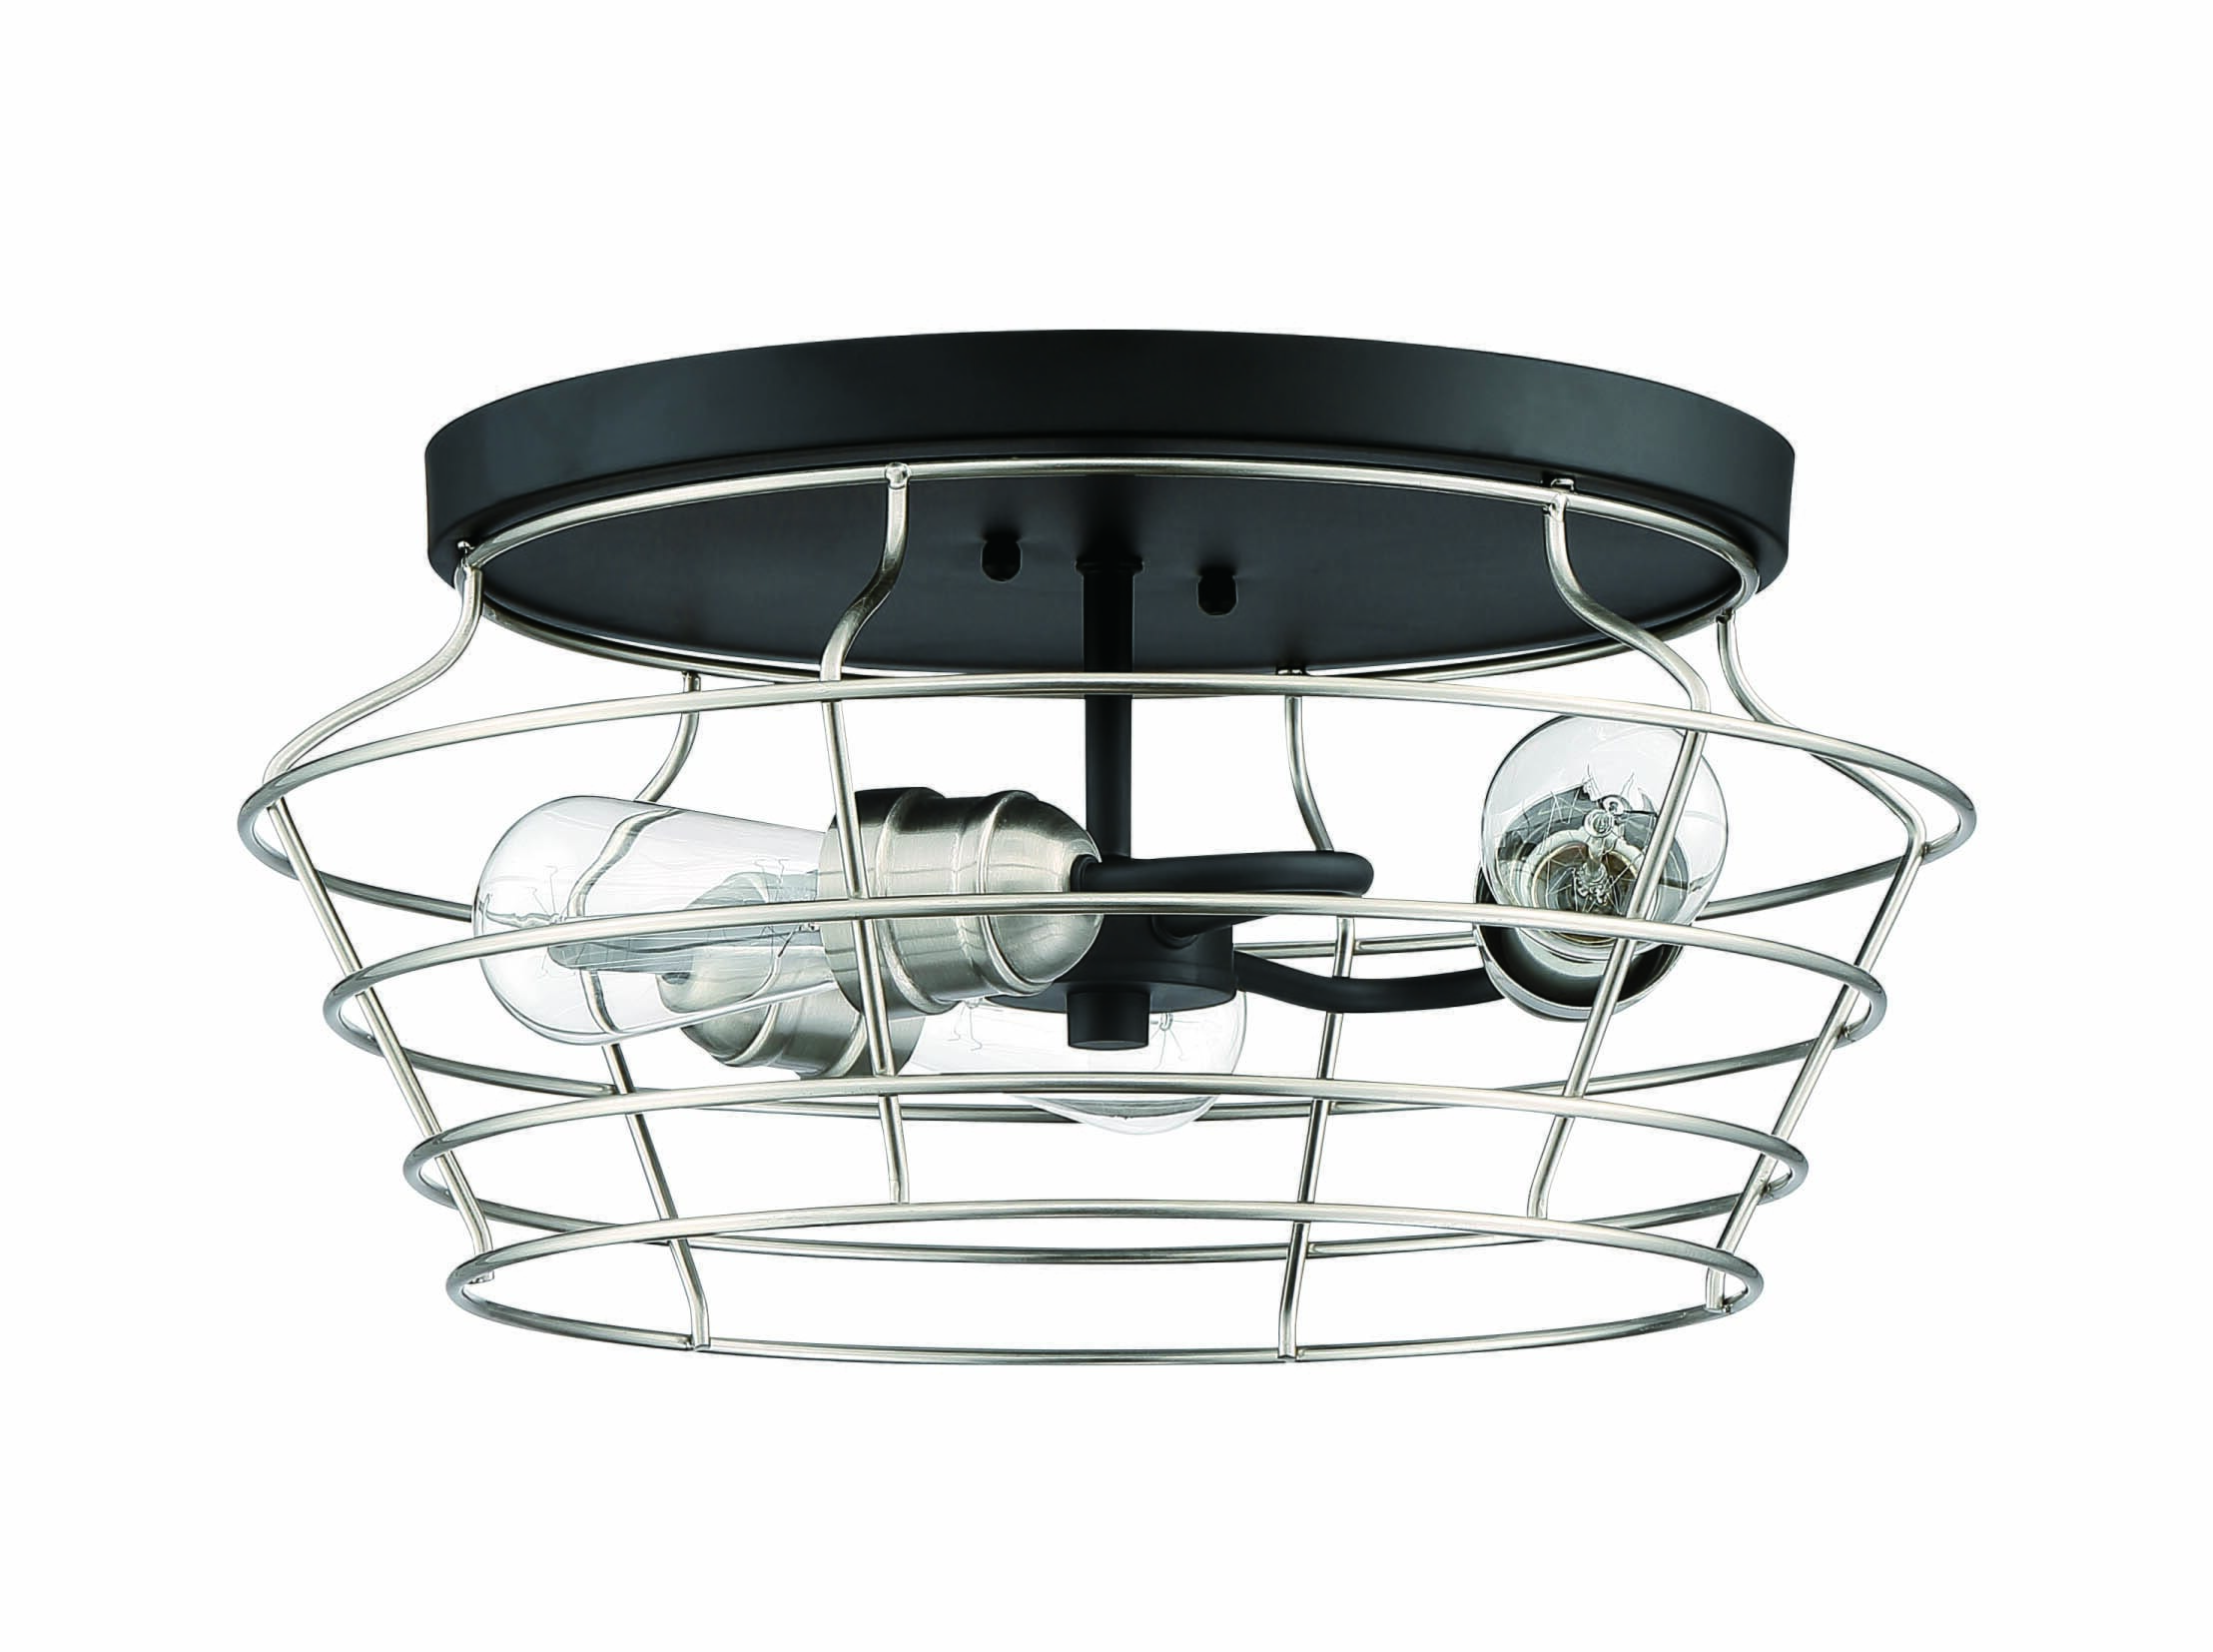 Thatcher 3-Light 17" Ceiling Light in Flat Black with Brushed Polished Nickel